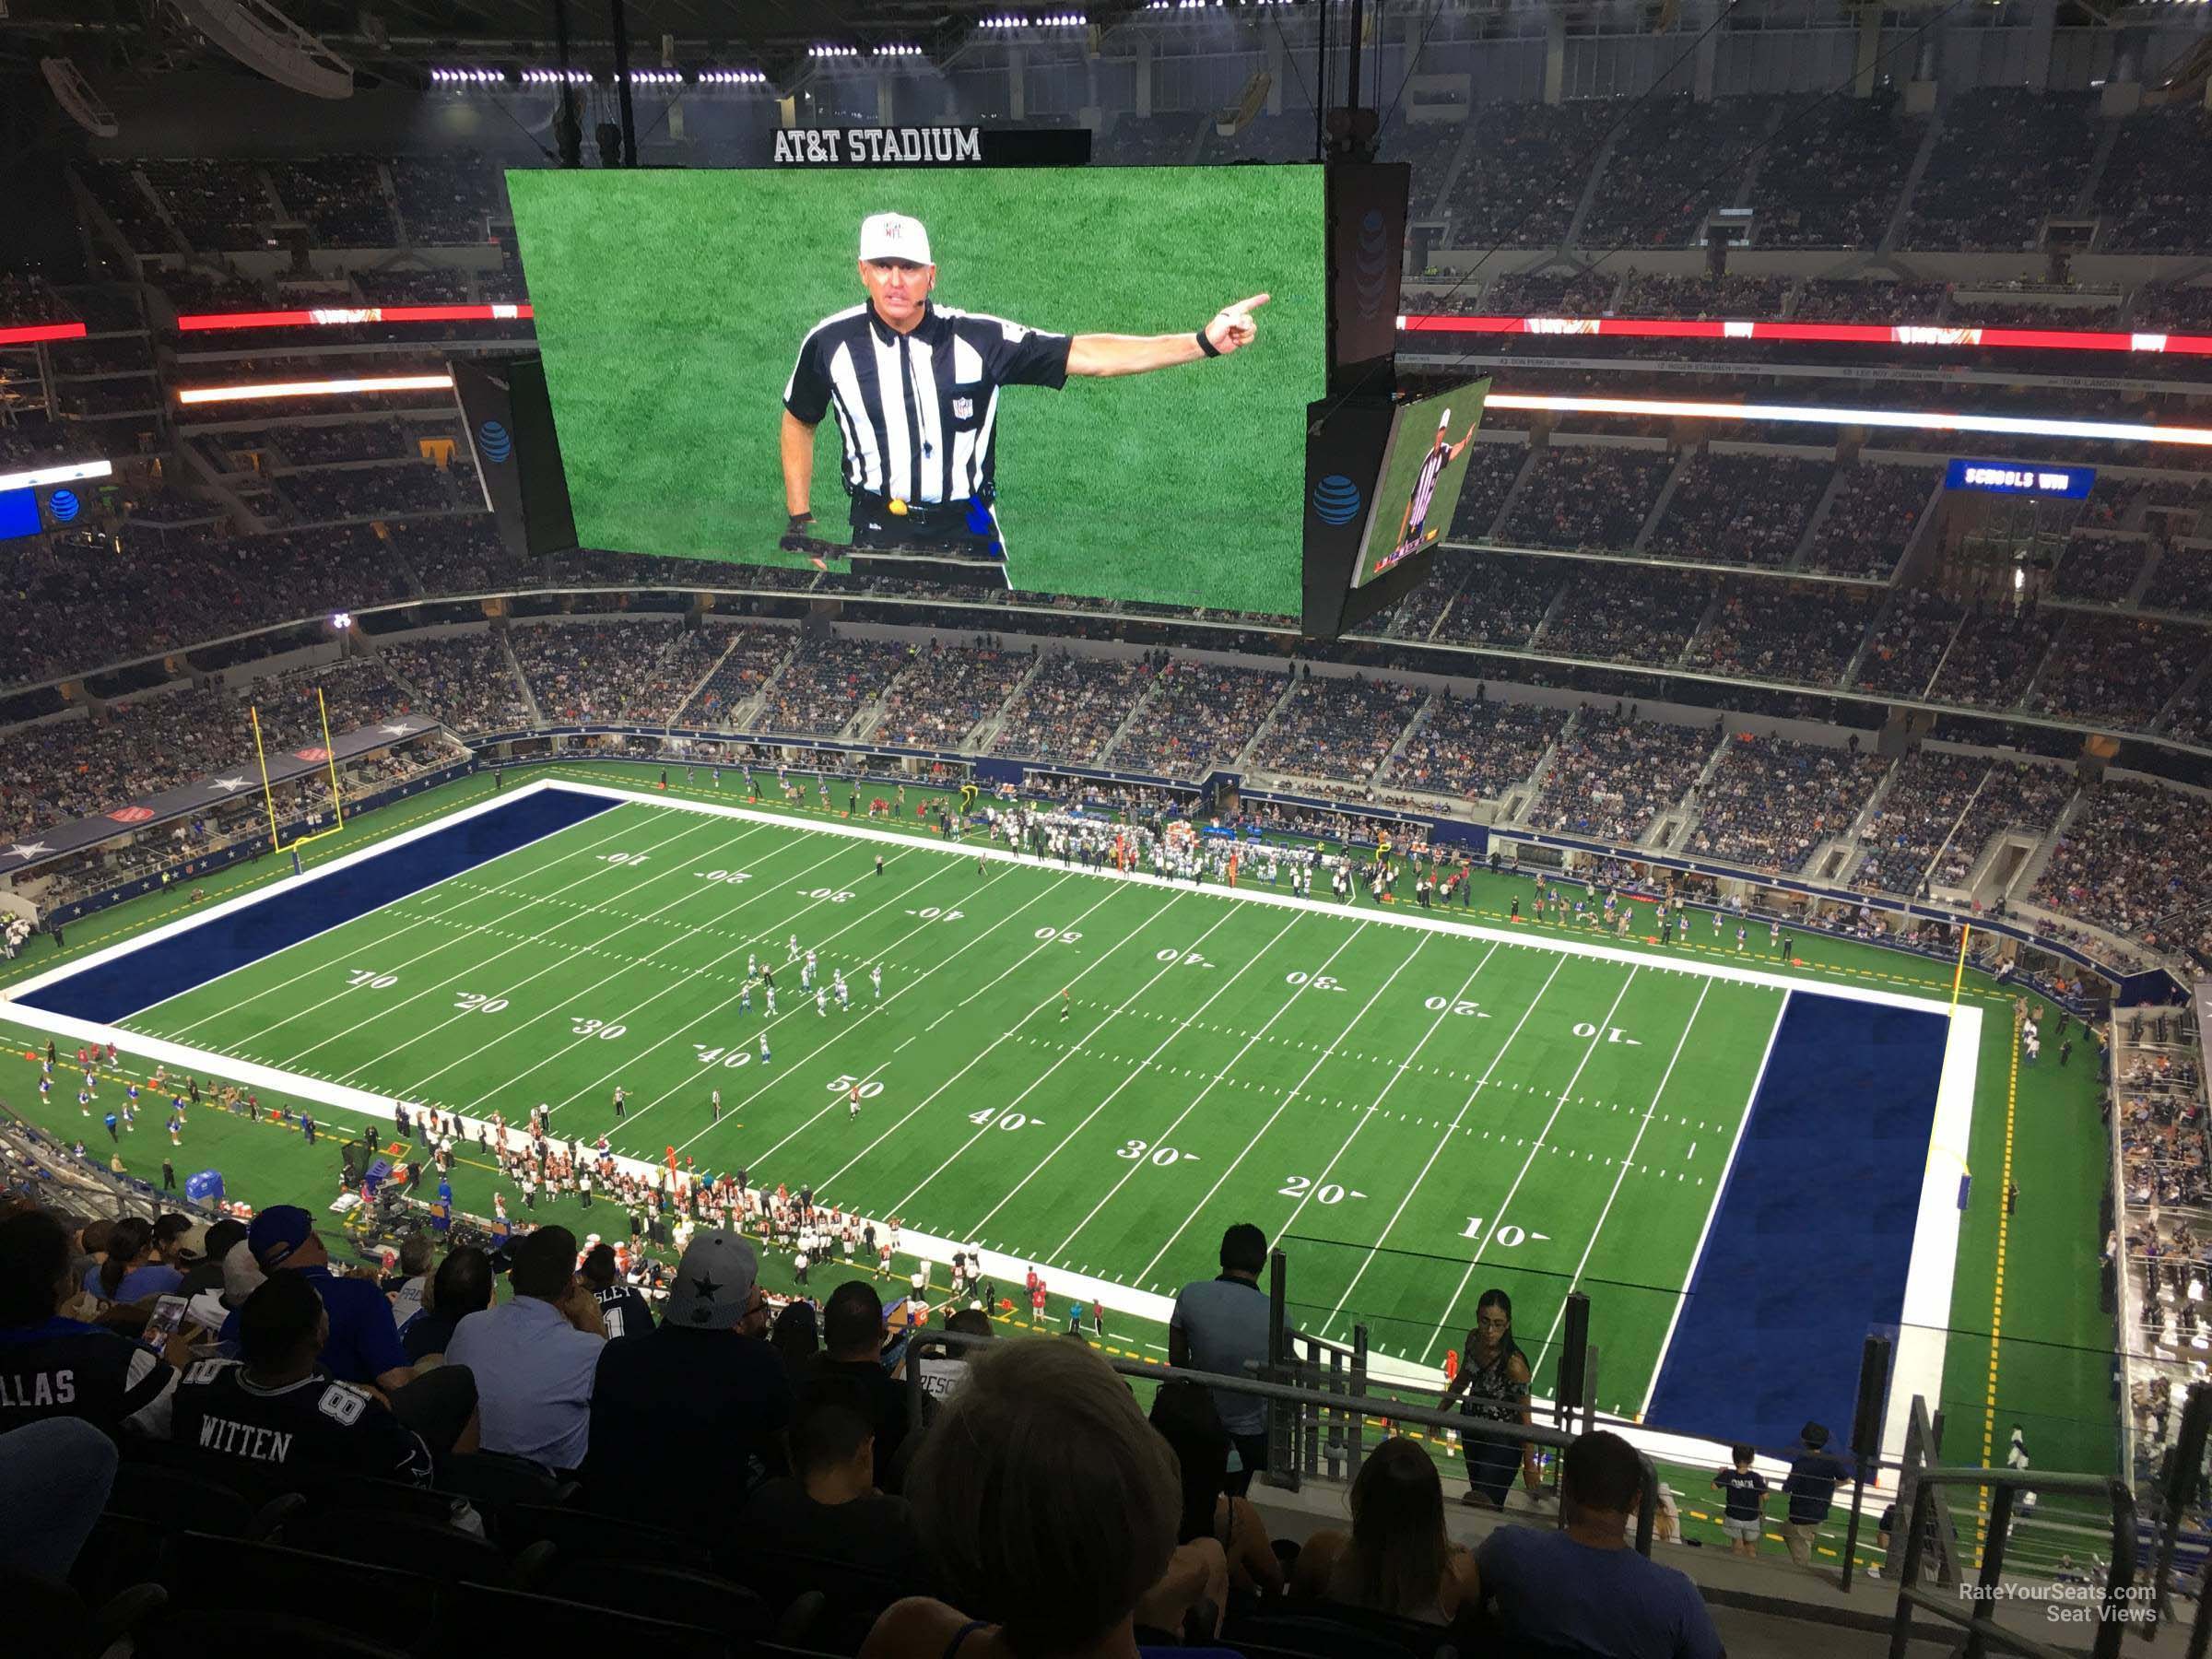 section 448, row 22 seat view  for football - at&t stadium (cowboys stadium)